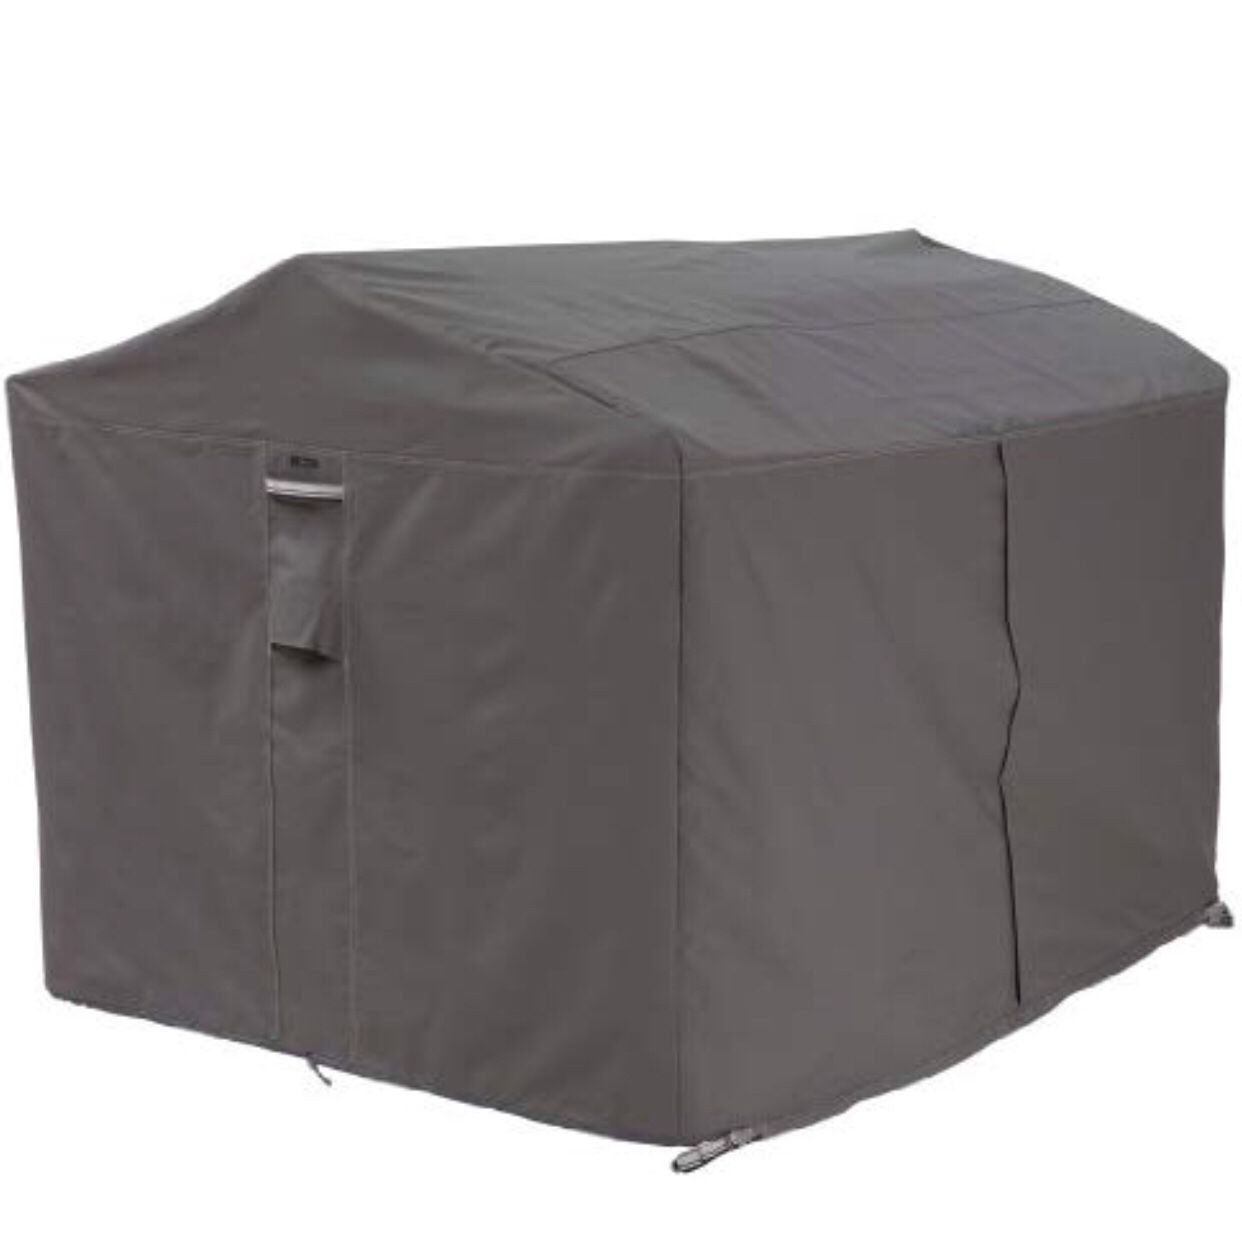 Brand New Premium Outdoor Furniture Cover with Durable and Water Resistant Fabric